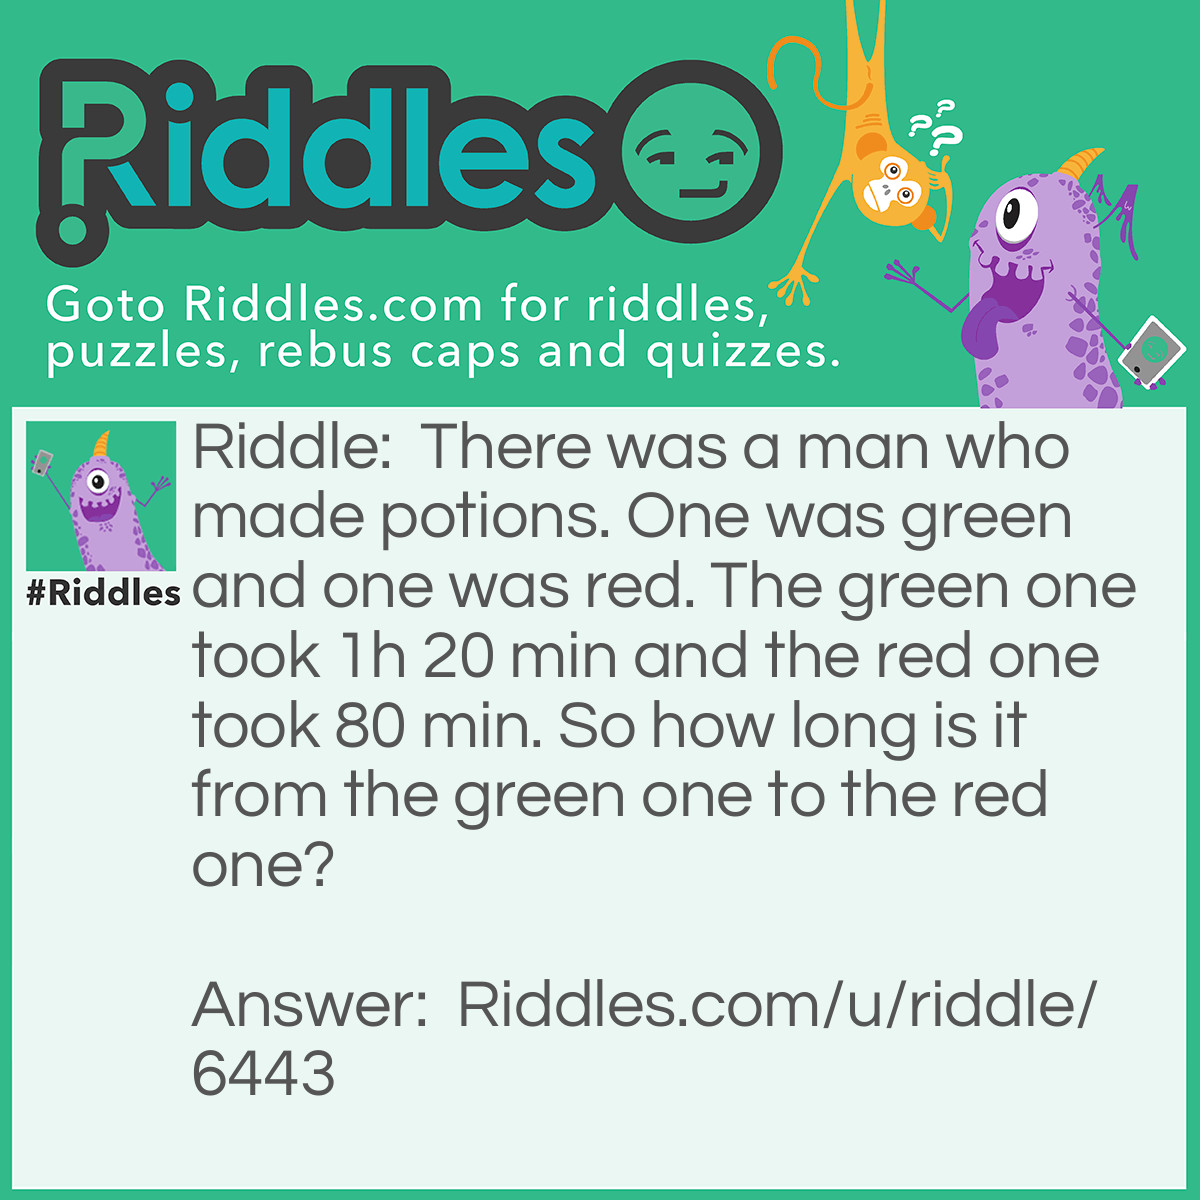 Riddle: There was a man who made potions. One was green and one was red. The green one took 1h 20 min and the red one took 80 min. So how long is it from the green one to the red one? Answer: Not even a second because 1h 20min is the same as 80min.